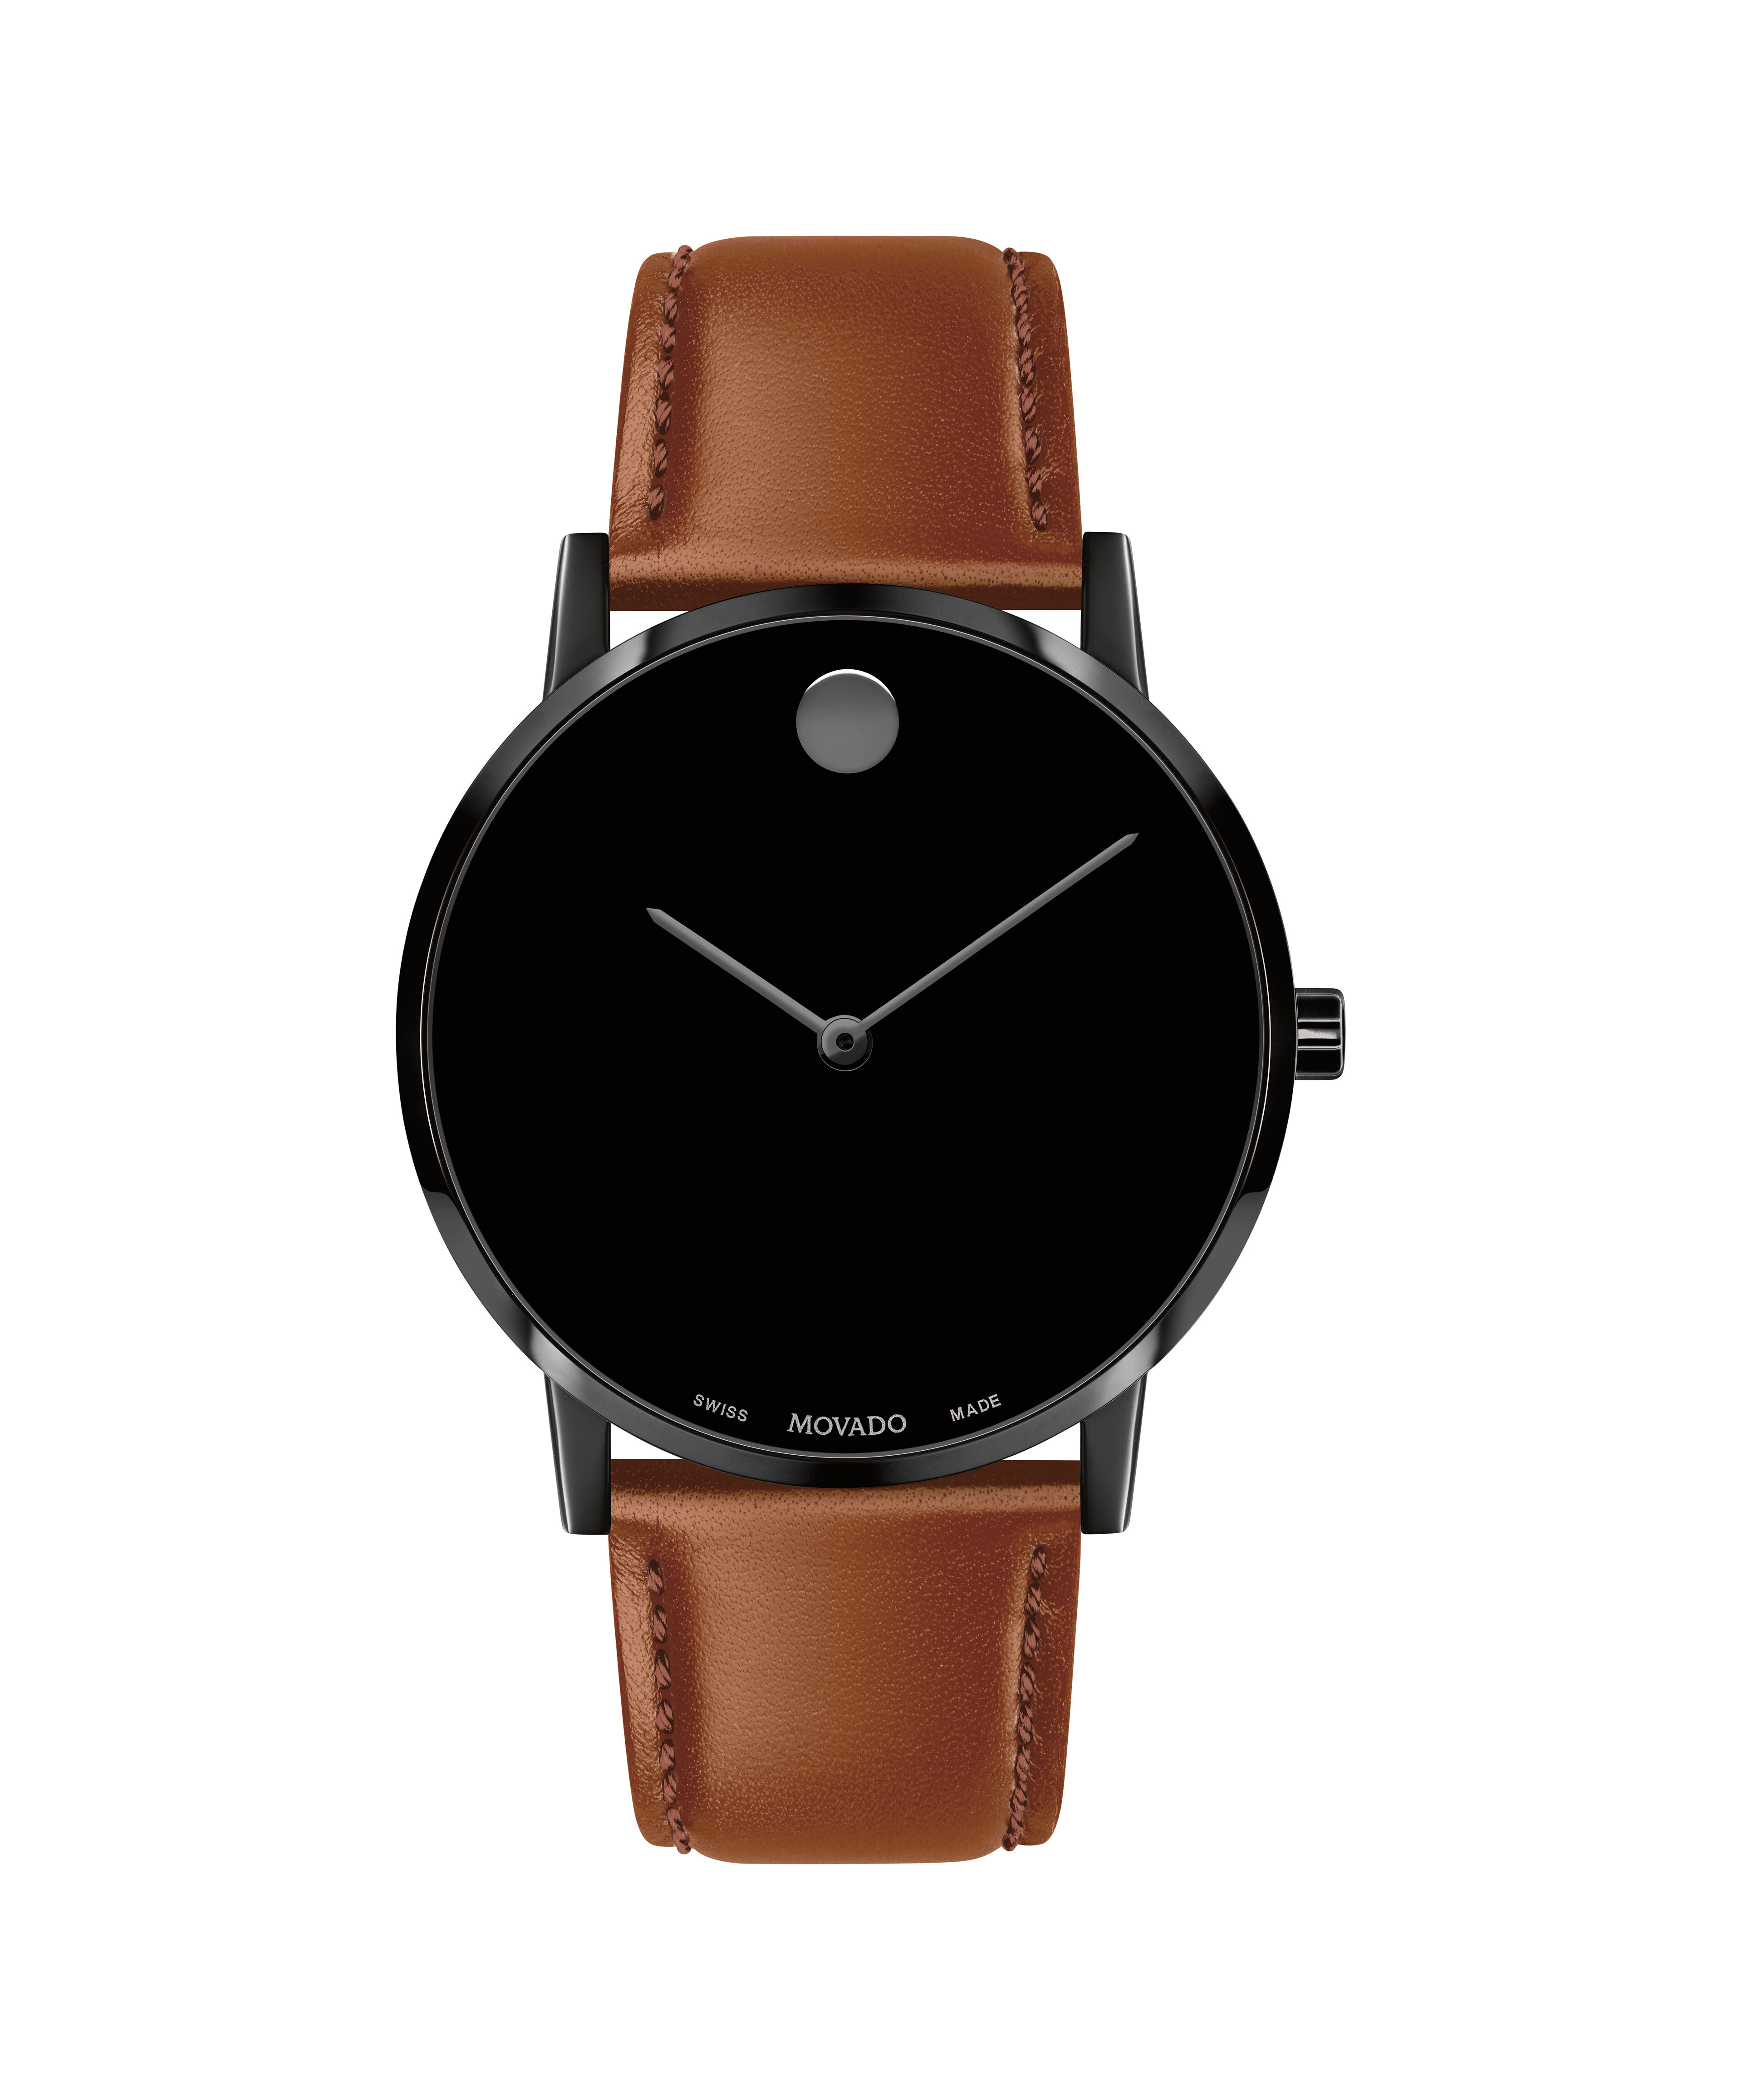 Clone Dunhill Watch